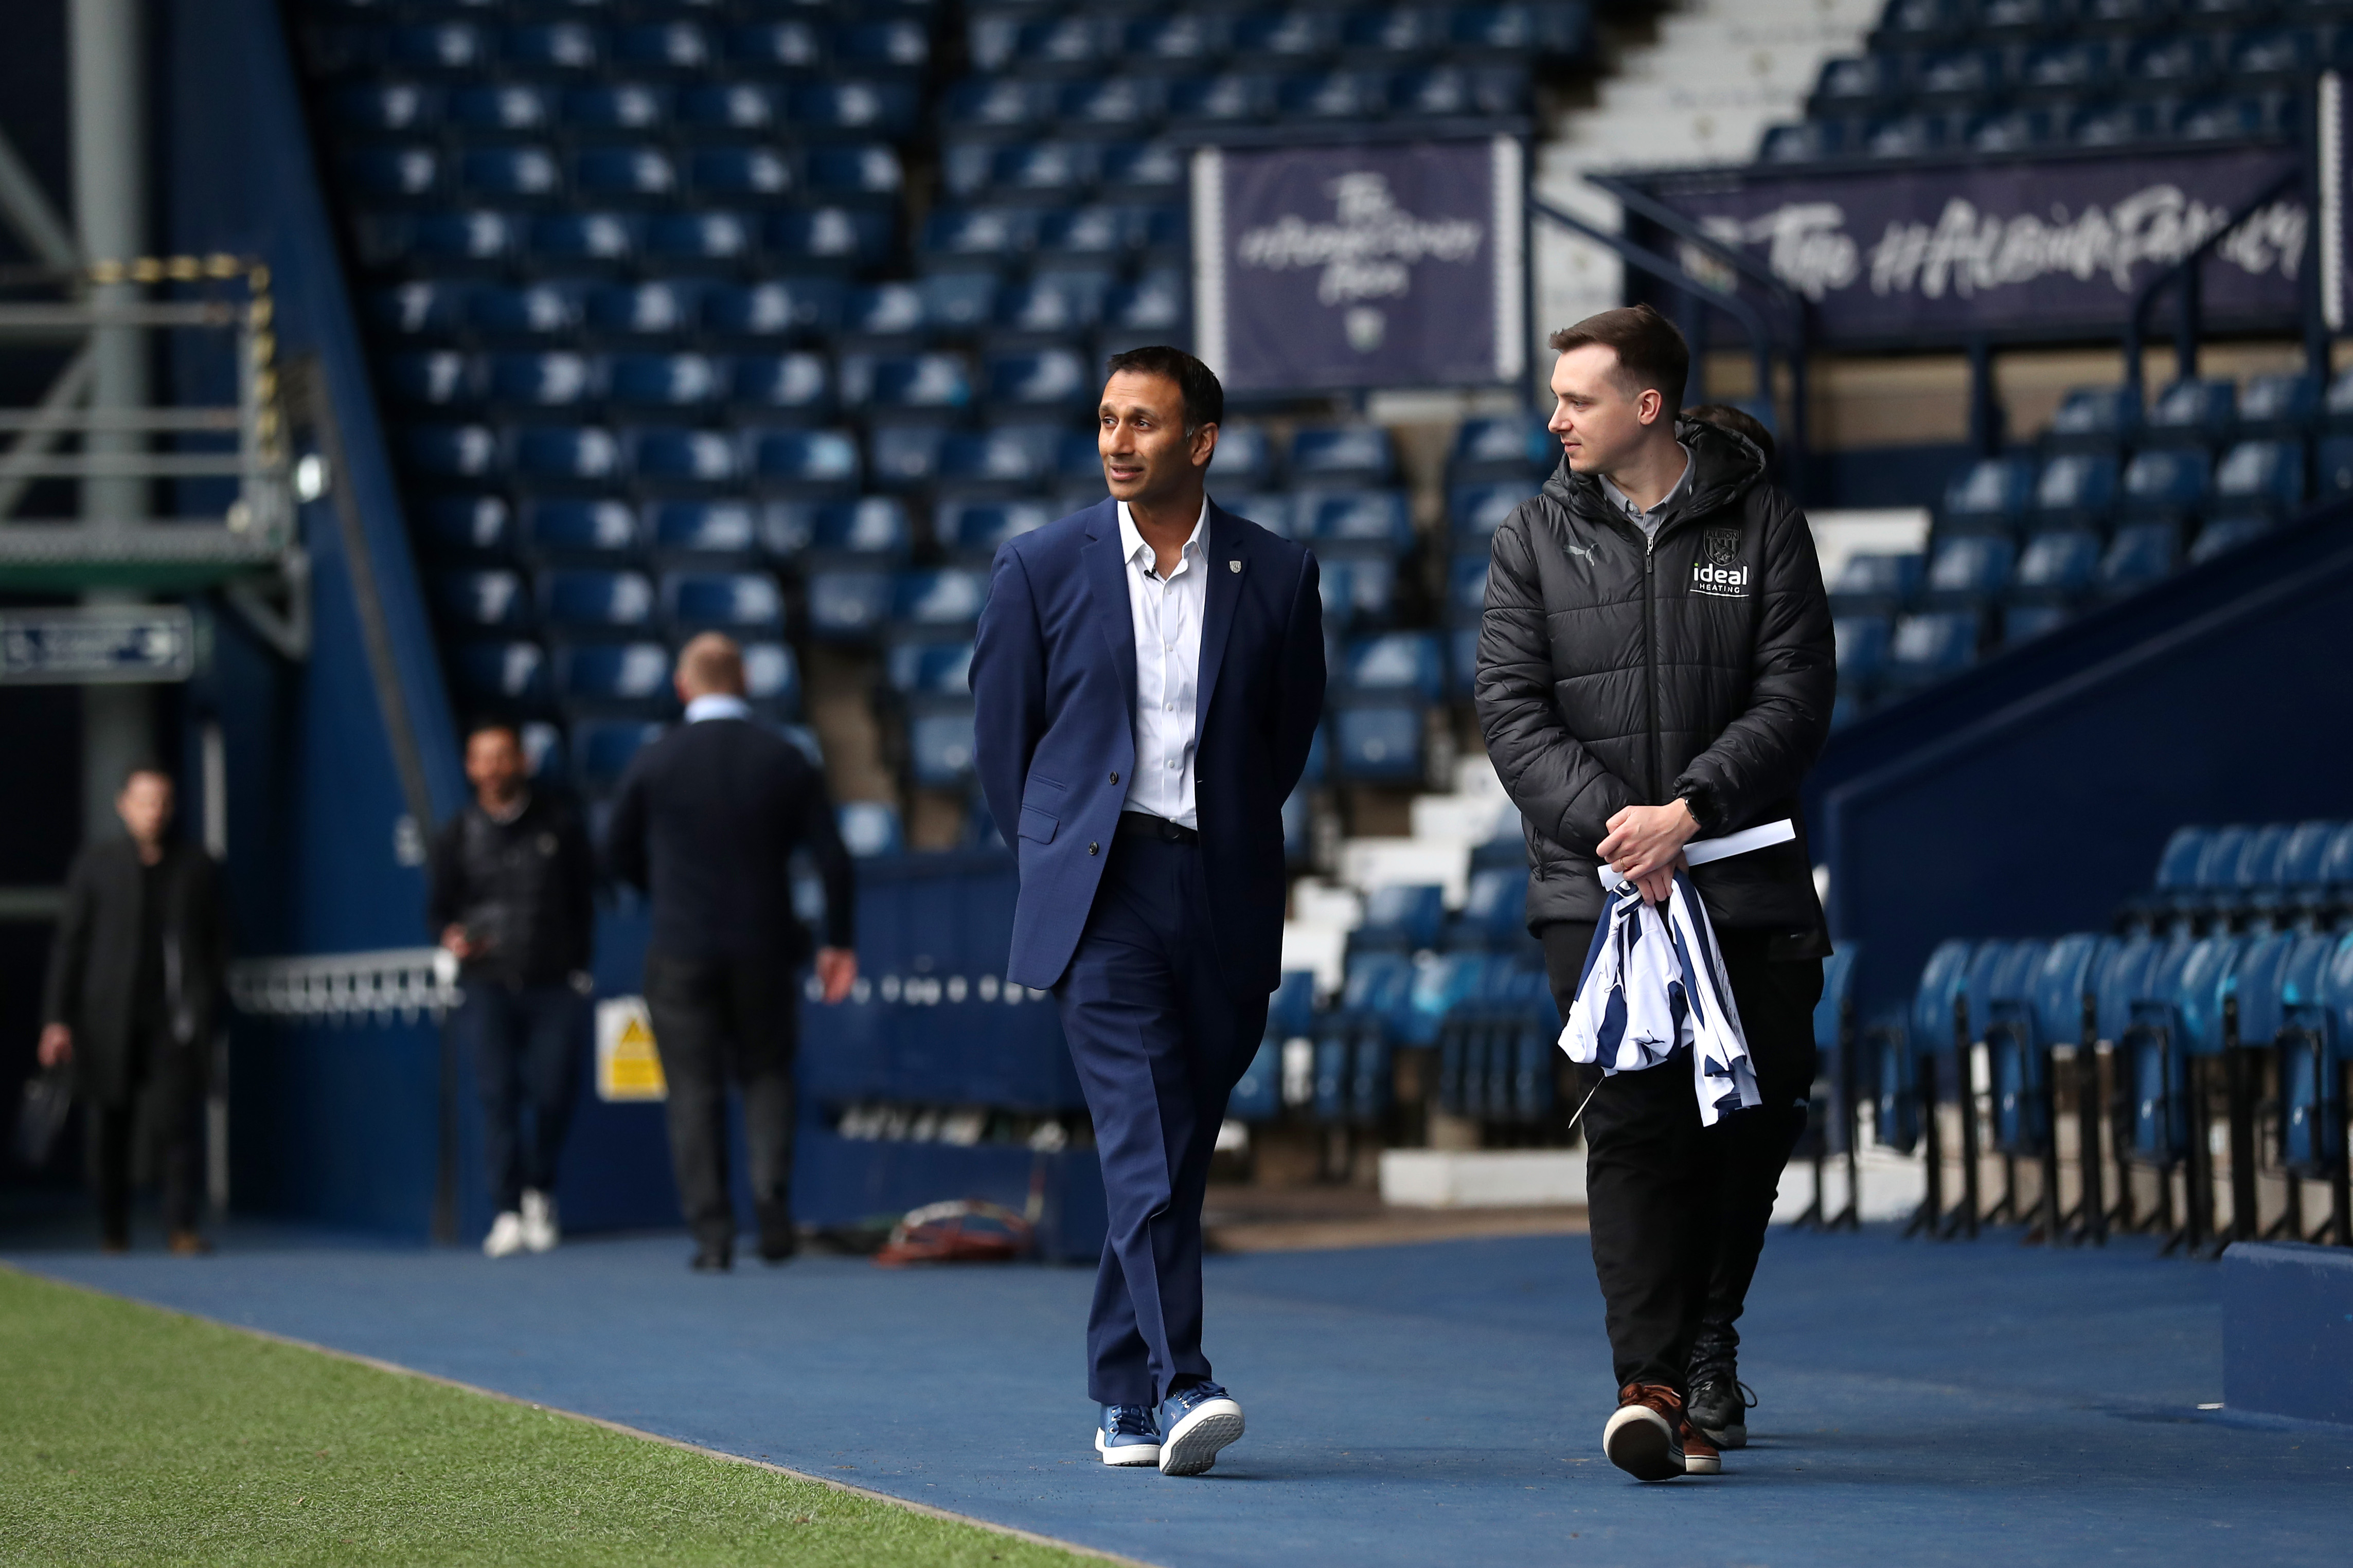 Shilen Patel walking along the blue track in front of the West Stand with West Bromwich Albion's Senior Communications Officer Sean Watts